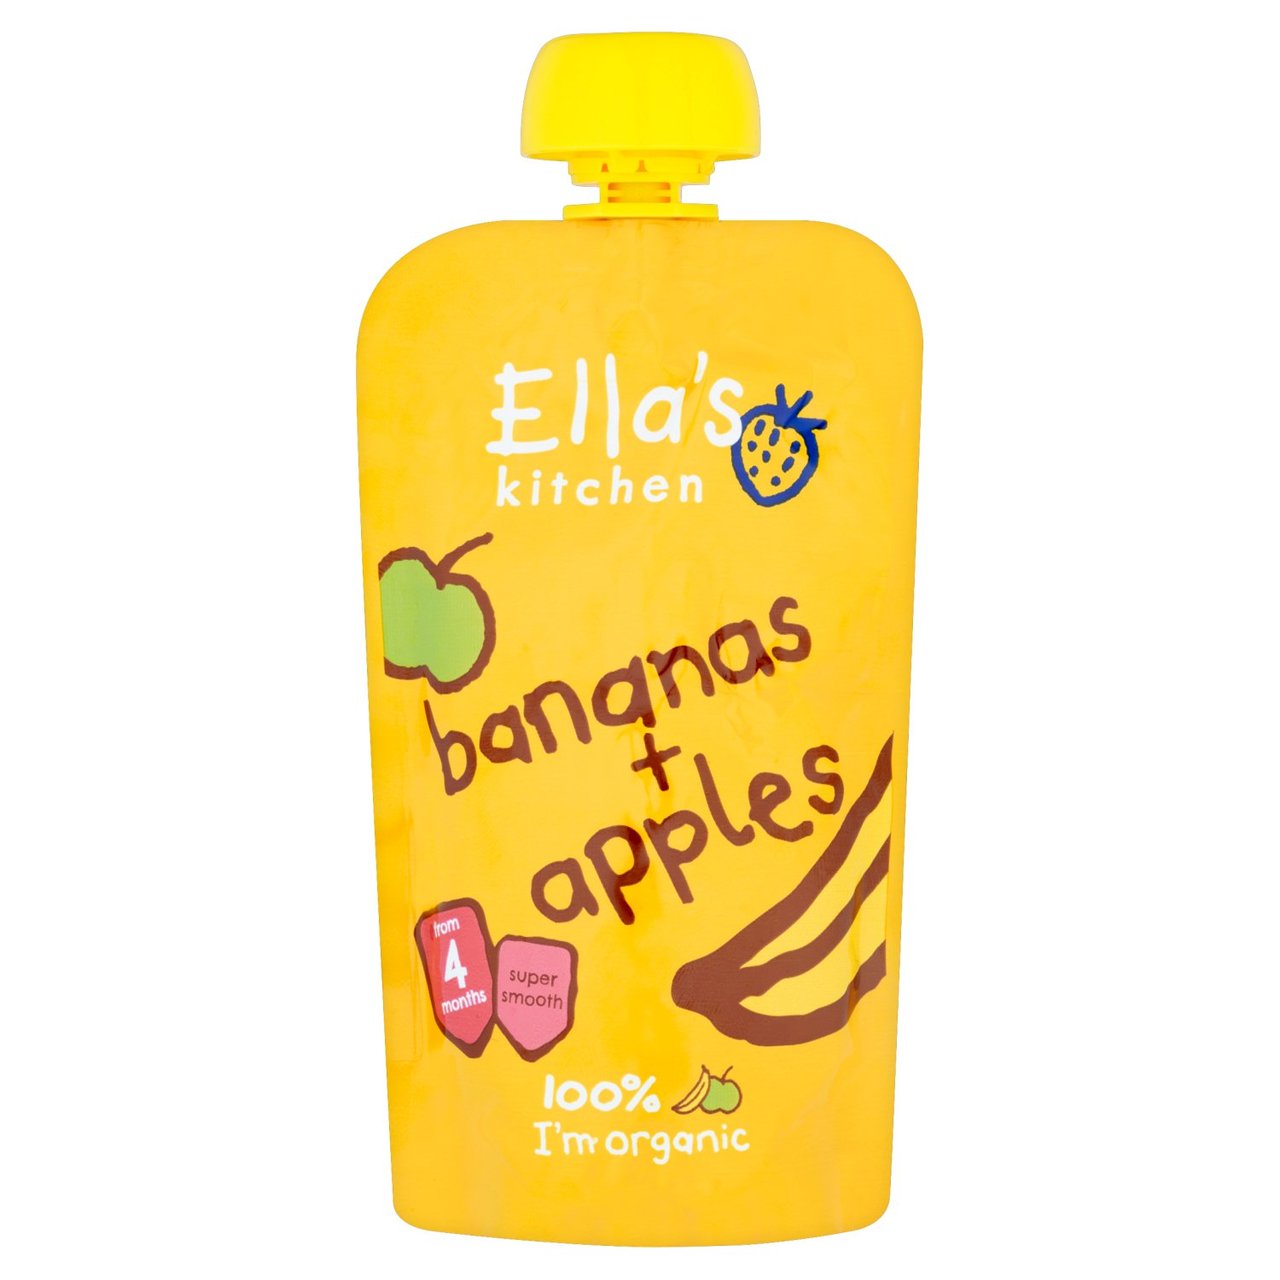 Ella's Kitchen Bananas and Apples Organic Puree Pouch, 4 mths+ 120g